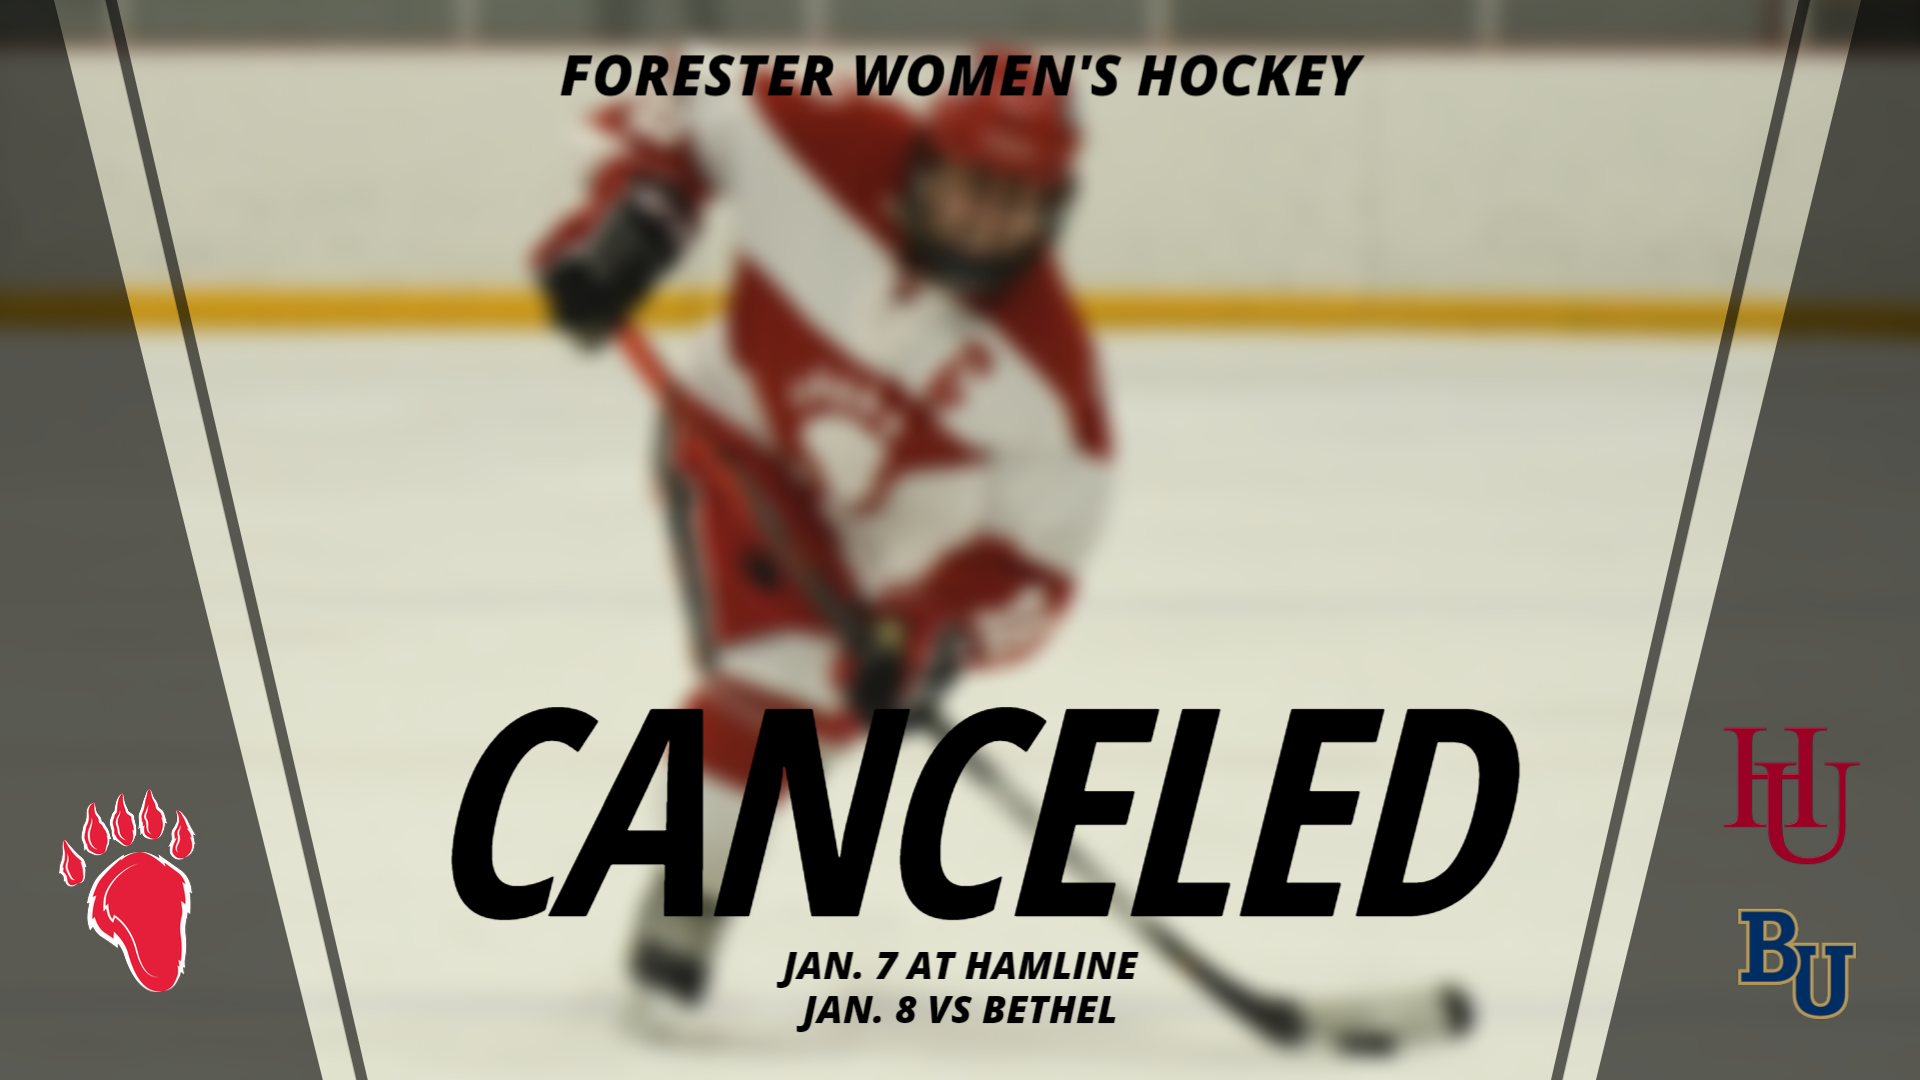 This Weekend's Women's Hockey Games at Hamline Canceled